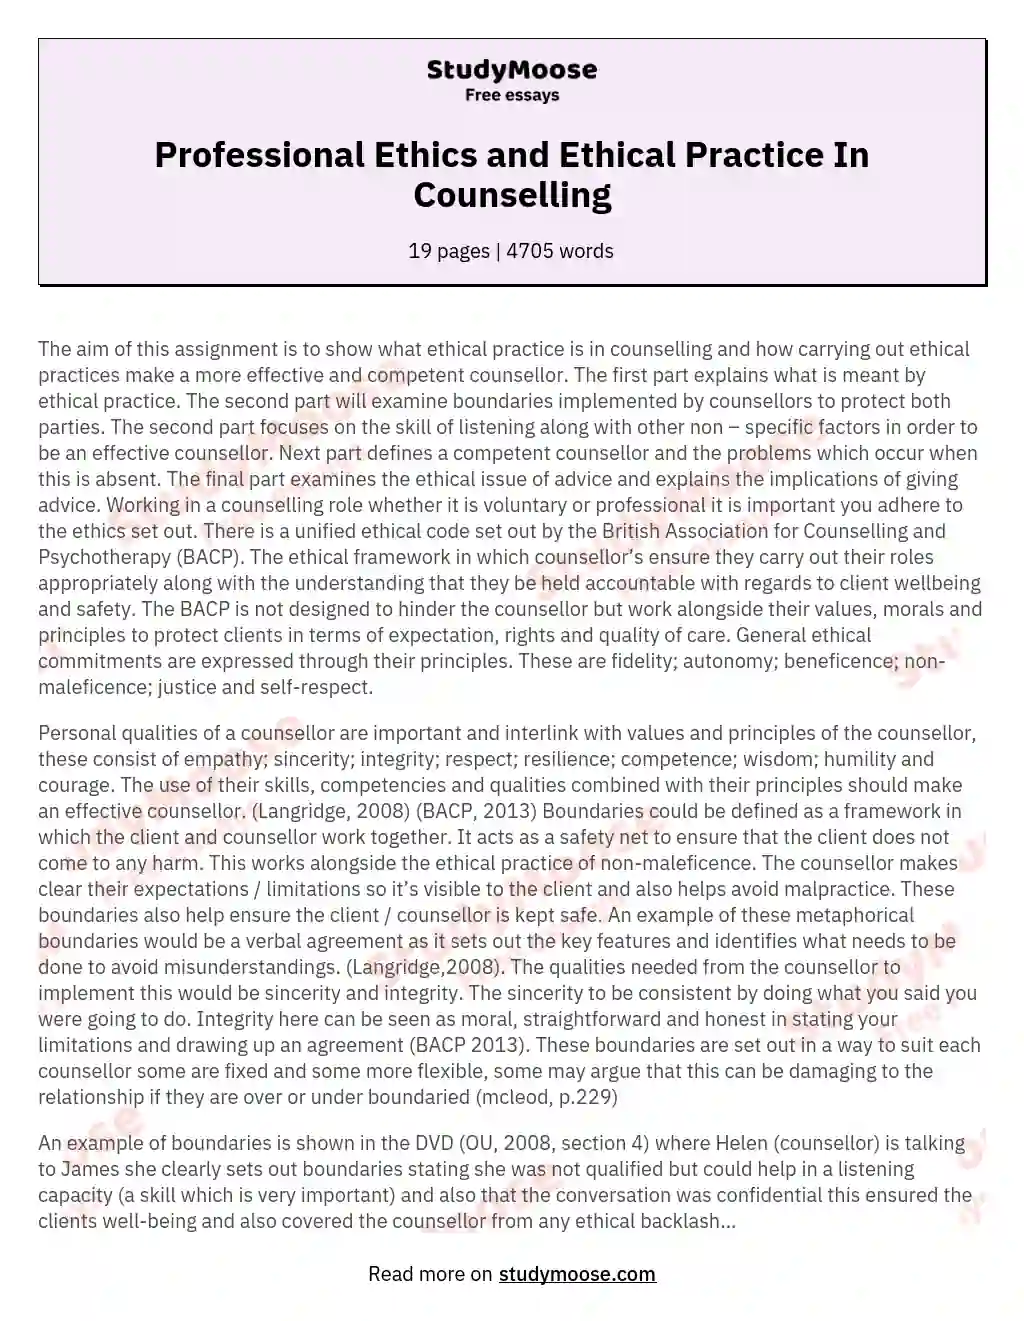 ethical practice in counselling